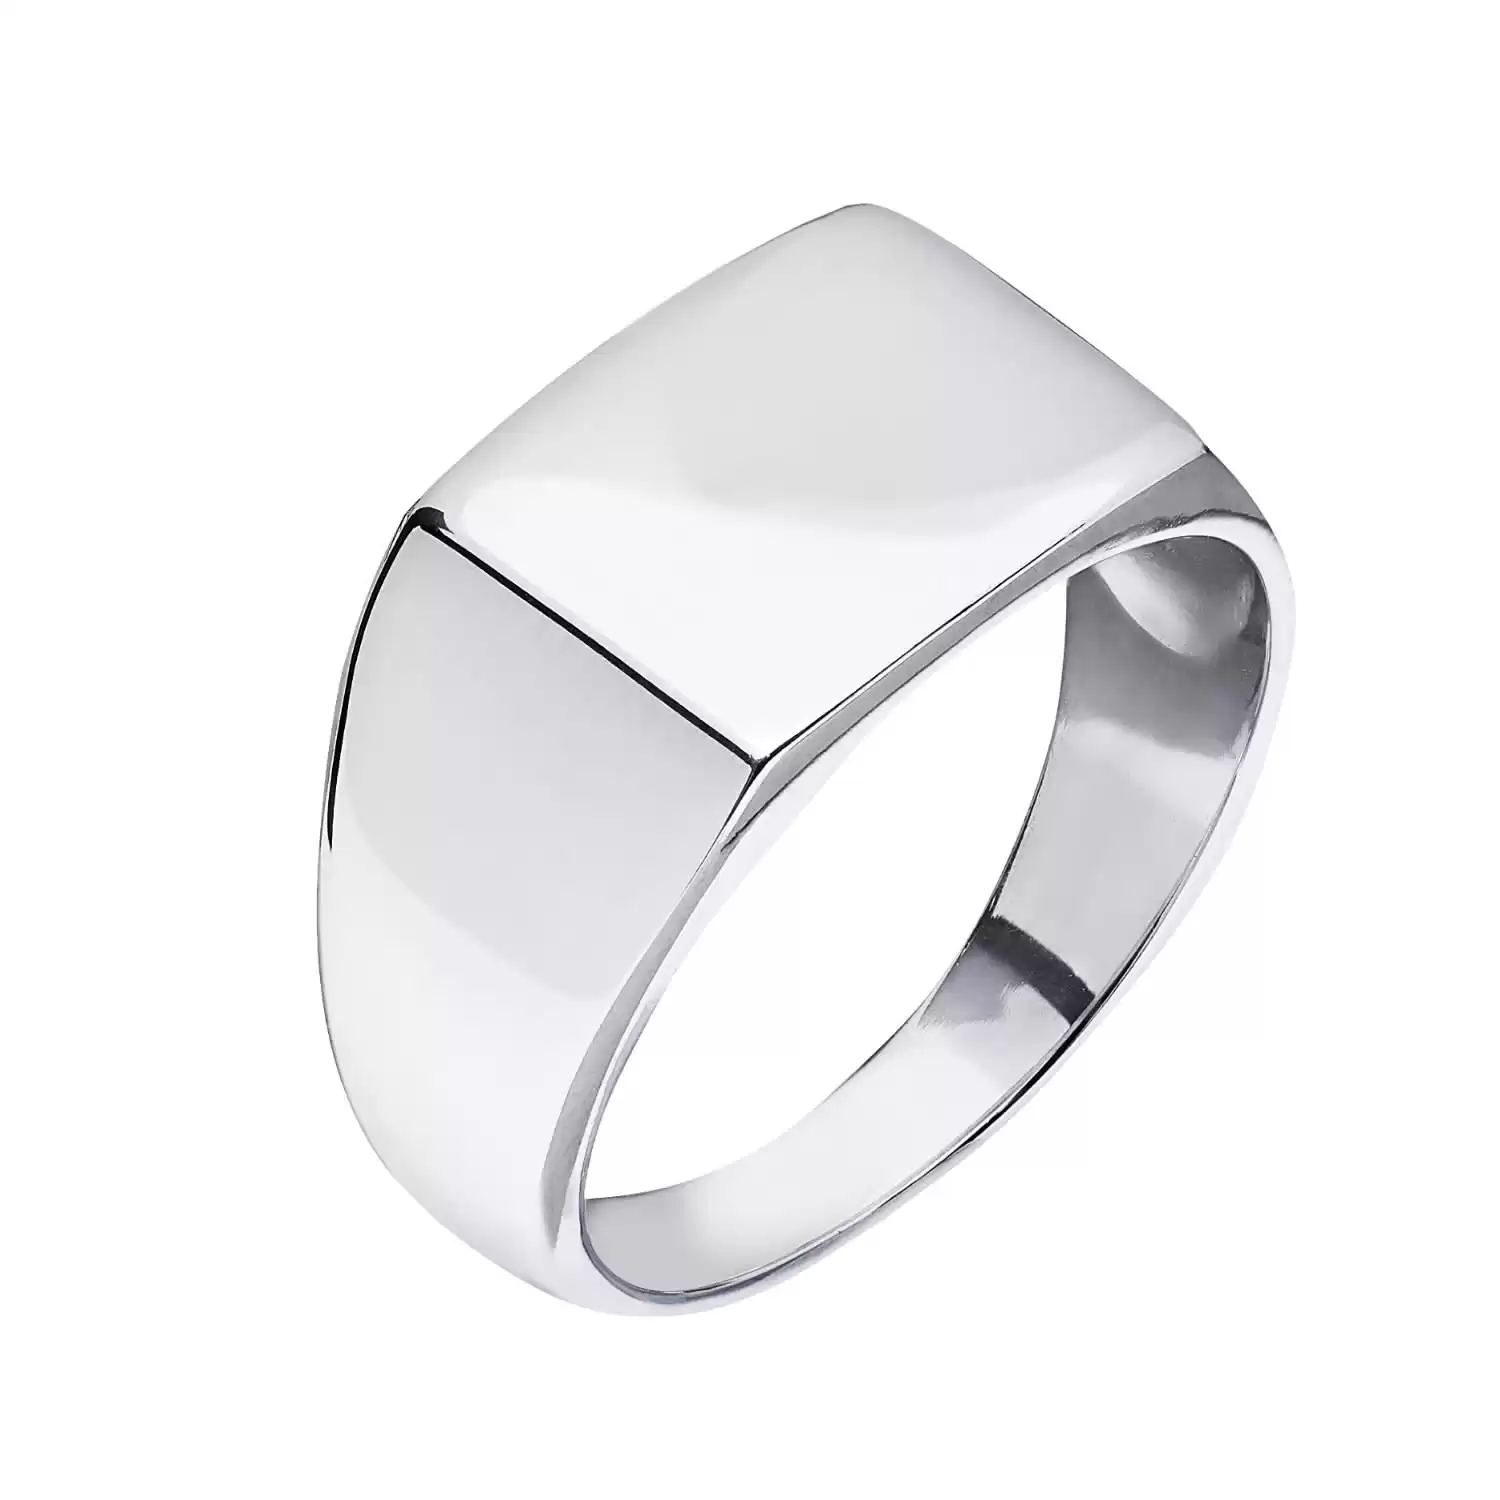 Kaizarin Signet Ring in Sterling Silver